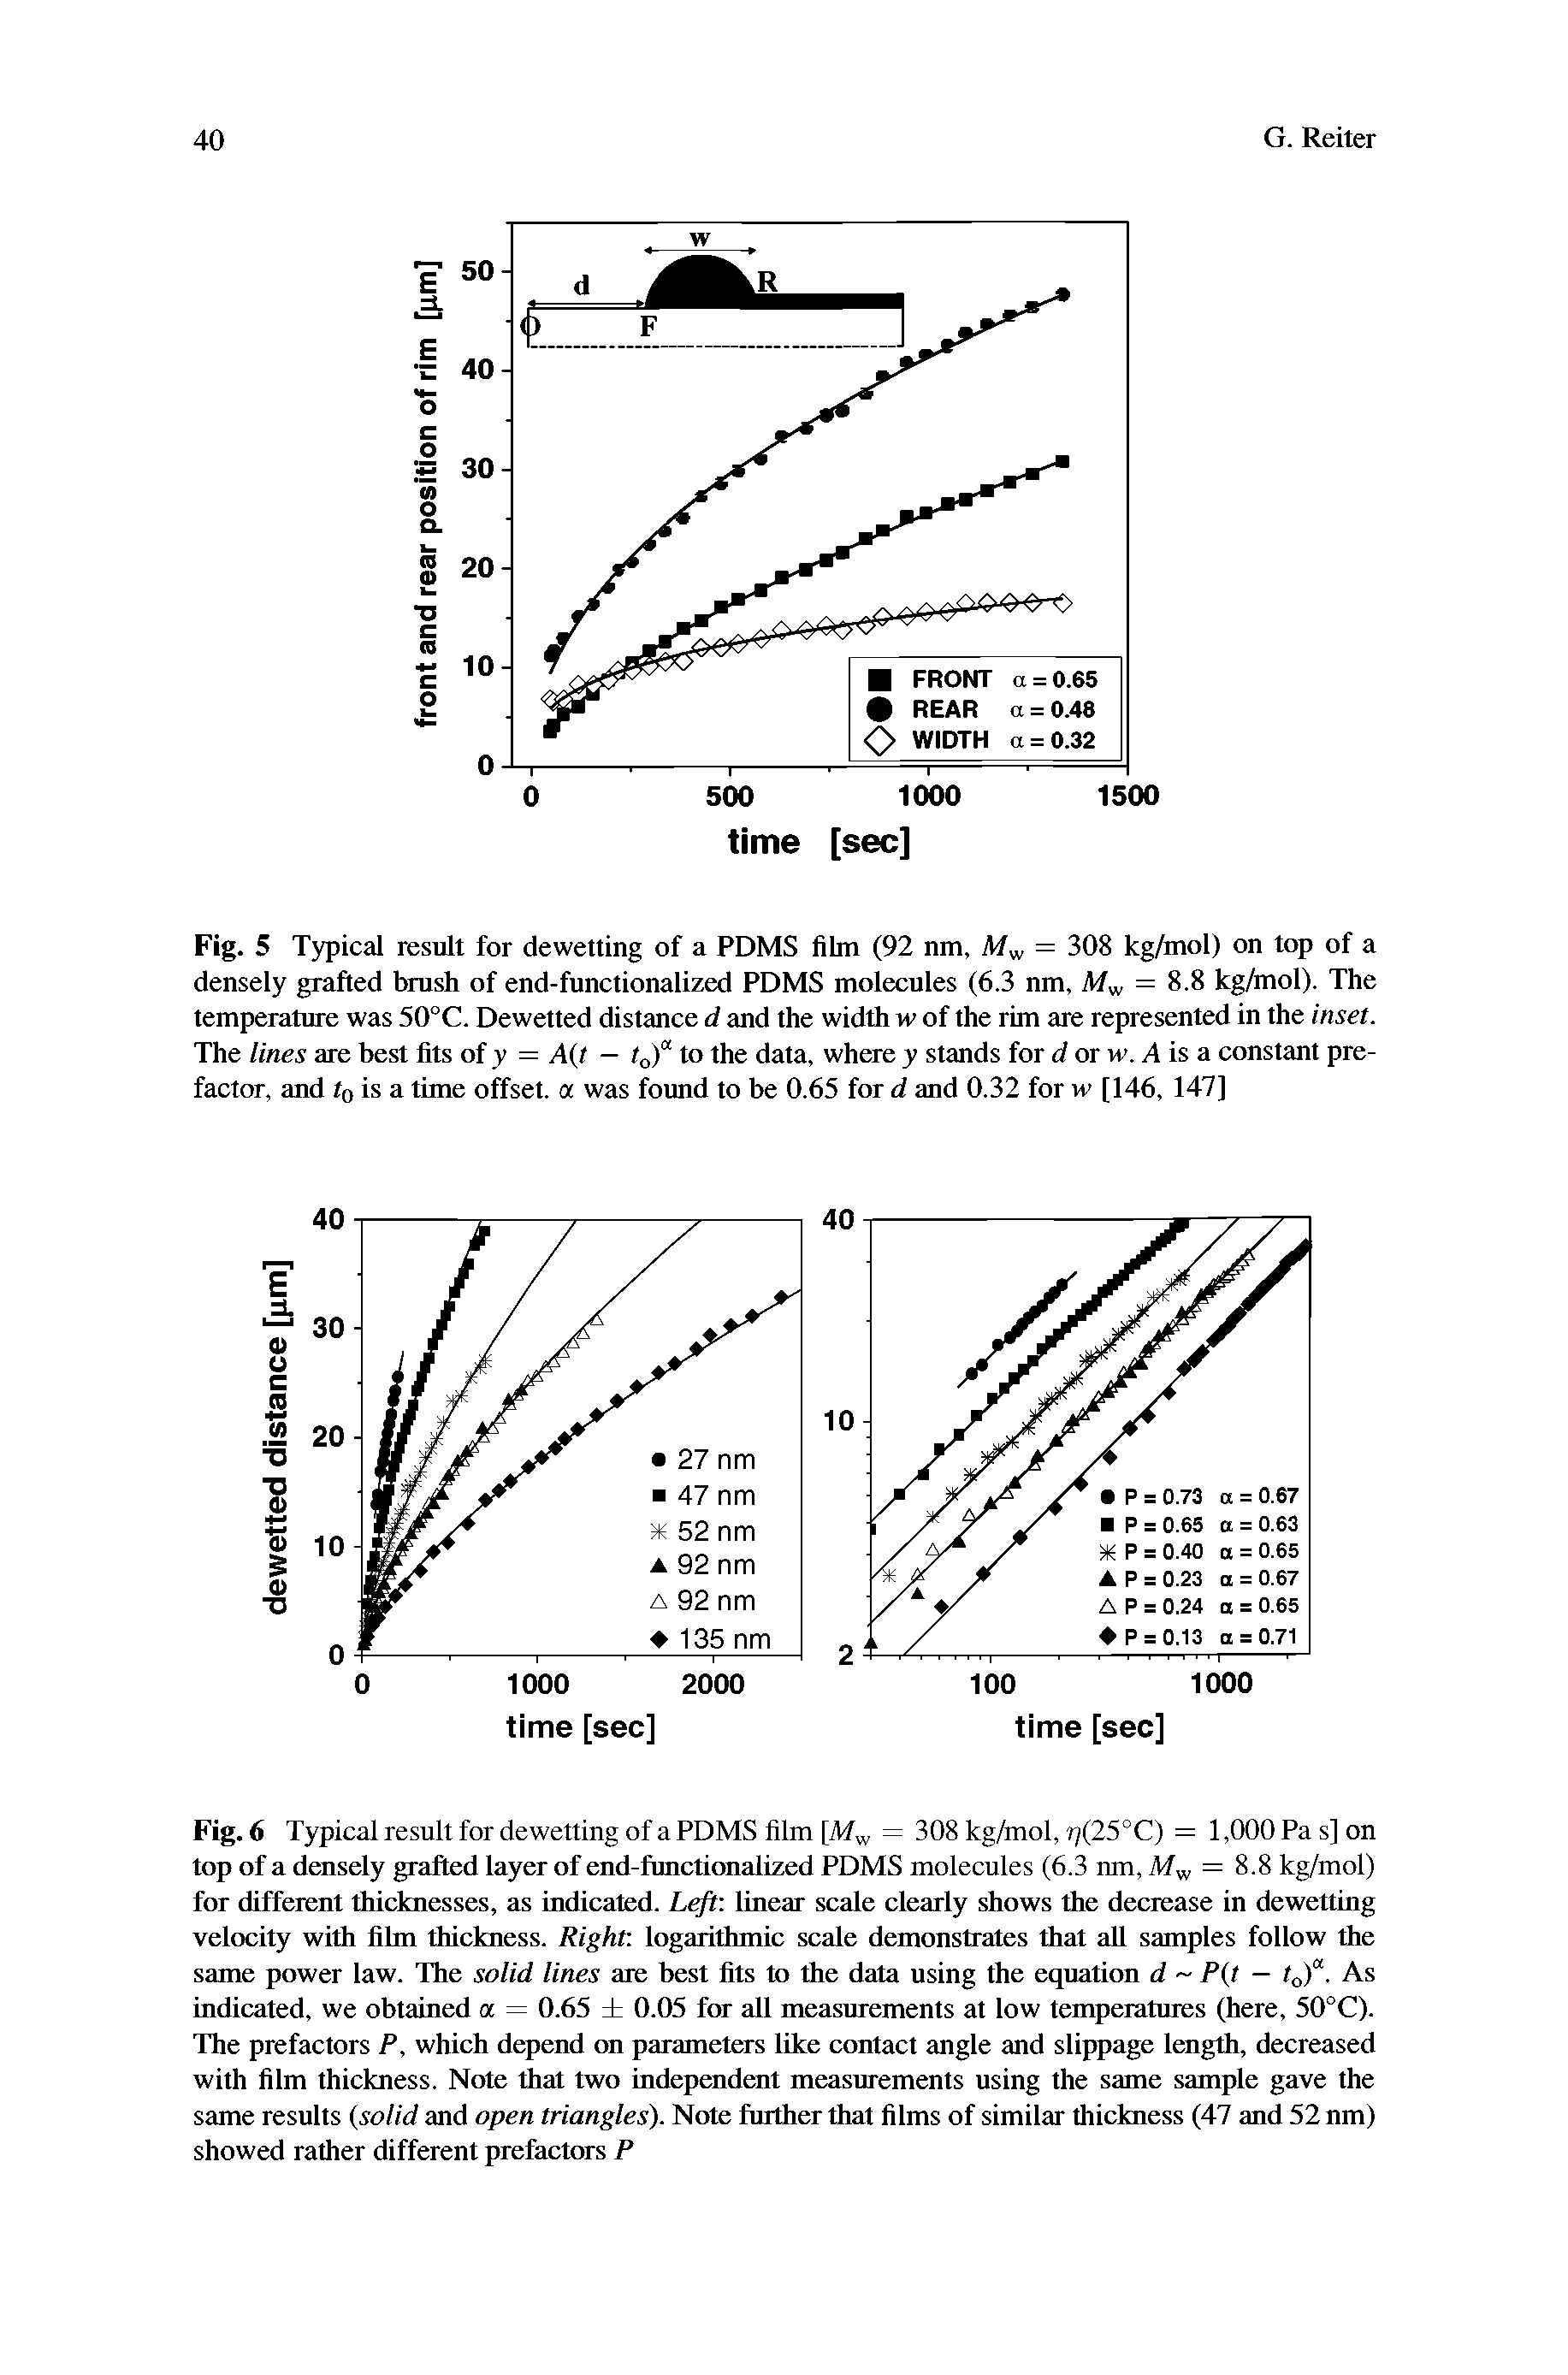 Fig. 5 Typical result for dewetting of a PDMS film (92 nm, = 308 kg/mol) on top of a densely grafted brush of end-functionalized PDMS molecules (6.3 nm, = 8.8 kgAnol). The temperature was 50°C. Dewetted distance d and the width w of the rim are represented in the inset. The lines are best fits of y = A(t — t f to the data, whae y stands for d or w. zl is a constant prefactor, and to is a time offset, a was foimd to be 0.65 for d and 0.32 for w [146, 147]...